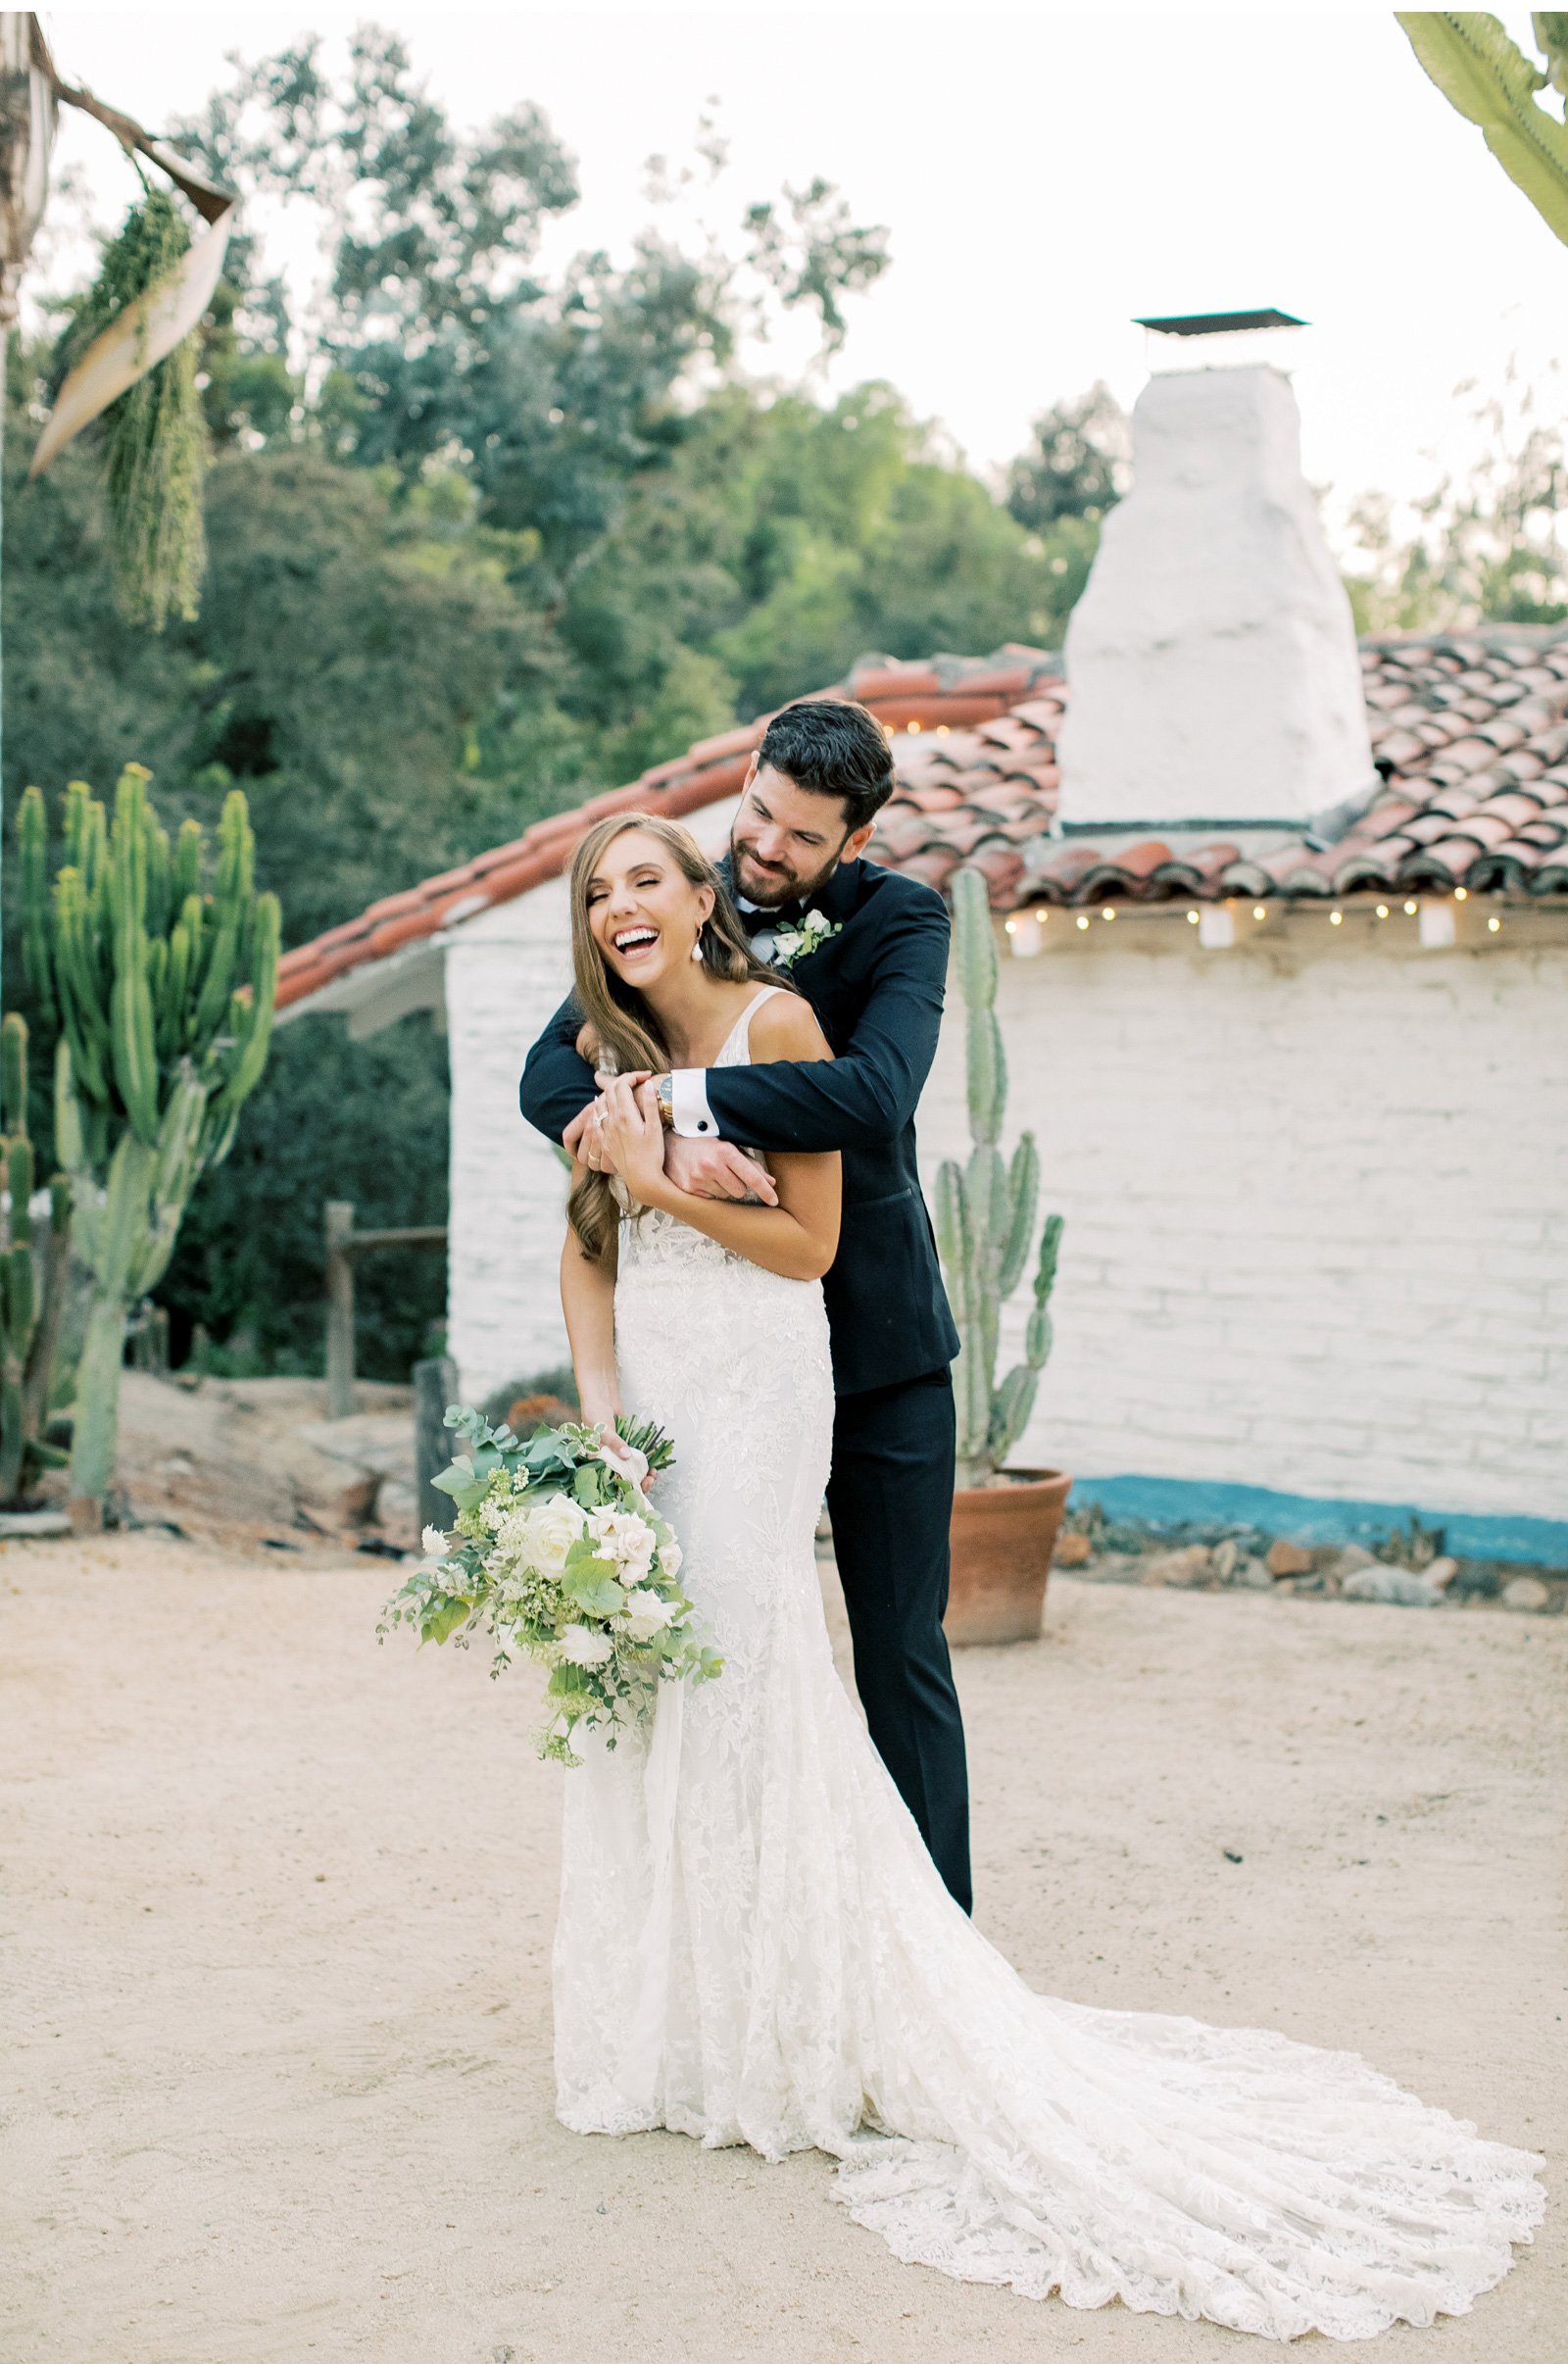 Dog-Wedding-Photo-Clean-and-Modern-Wedding-Photography-High-End-Wedding-Photographers-Bright-and-Airy-Photography-Southern-California-Events-Bride-and-Groom-Photo_09.jpg